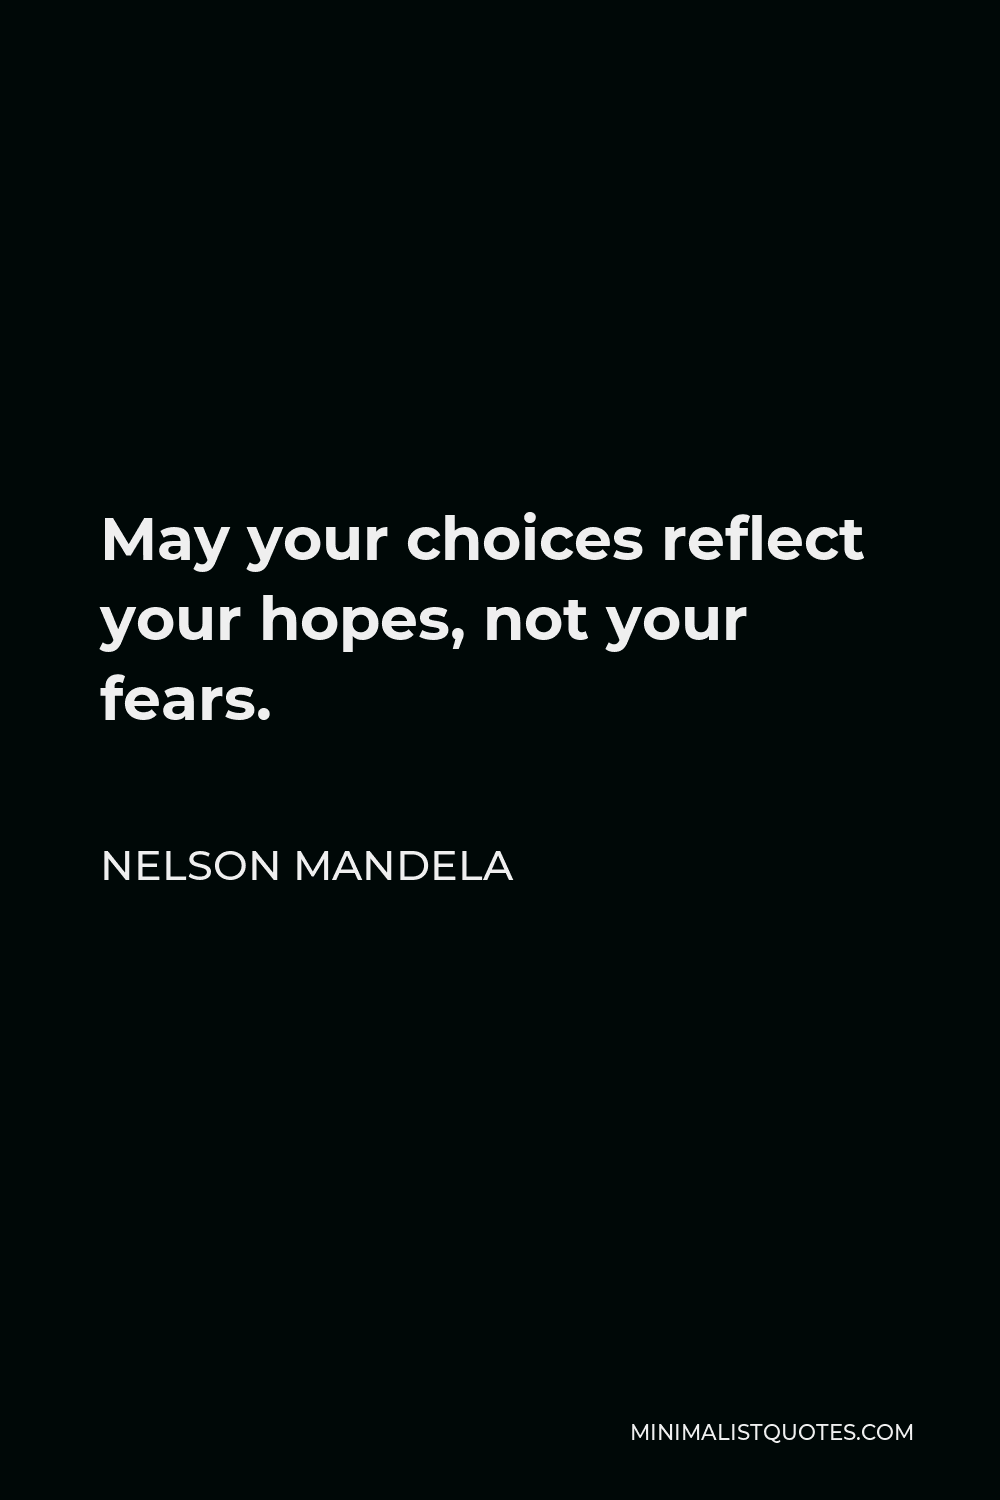 Not Your Fears May Your Choices Reflect Your Hopes Magnet Large 3.50 Inches Activist Nelson Mandela Quote Black History